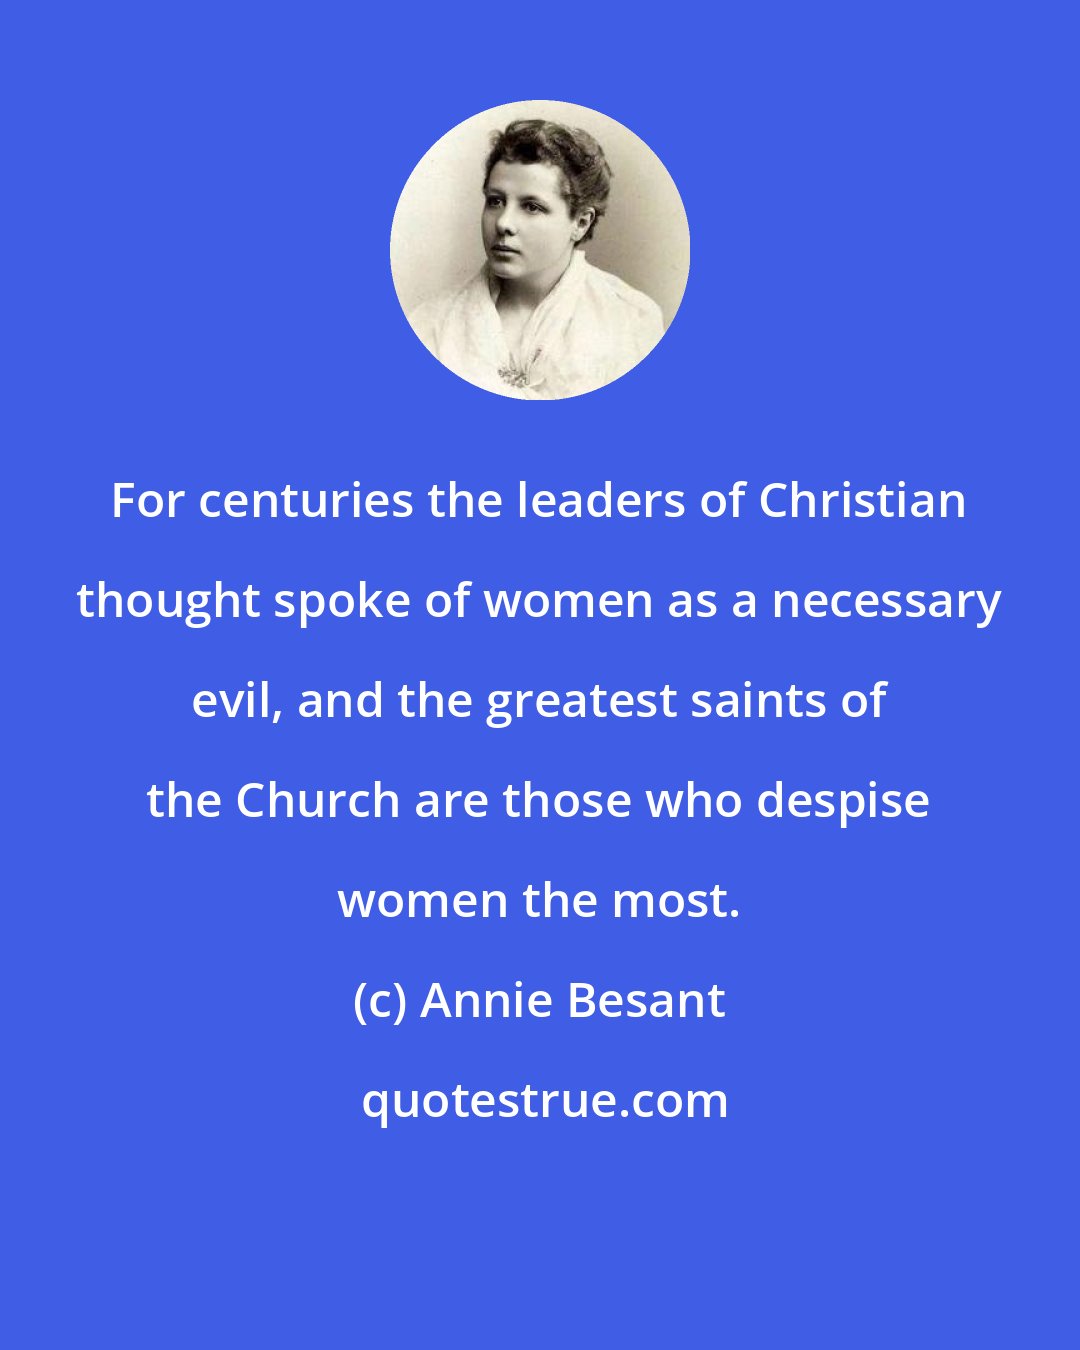 Annie Besant: For centuries the leaders of Christian thought spoke of women as a necessary evil, and the greatest saints of the Church are those who despise women the most.